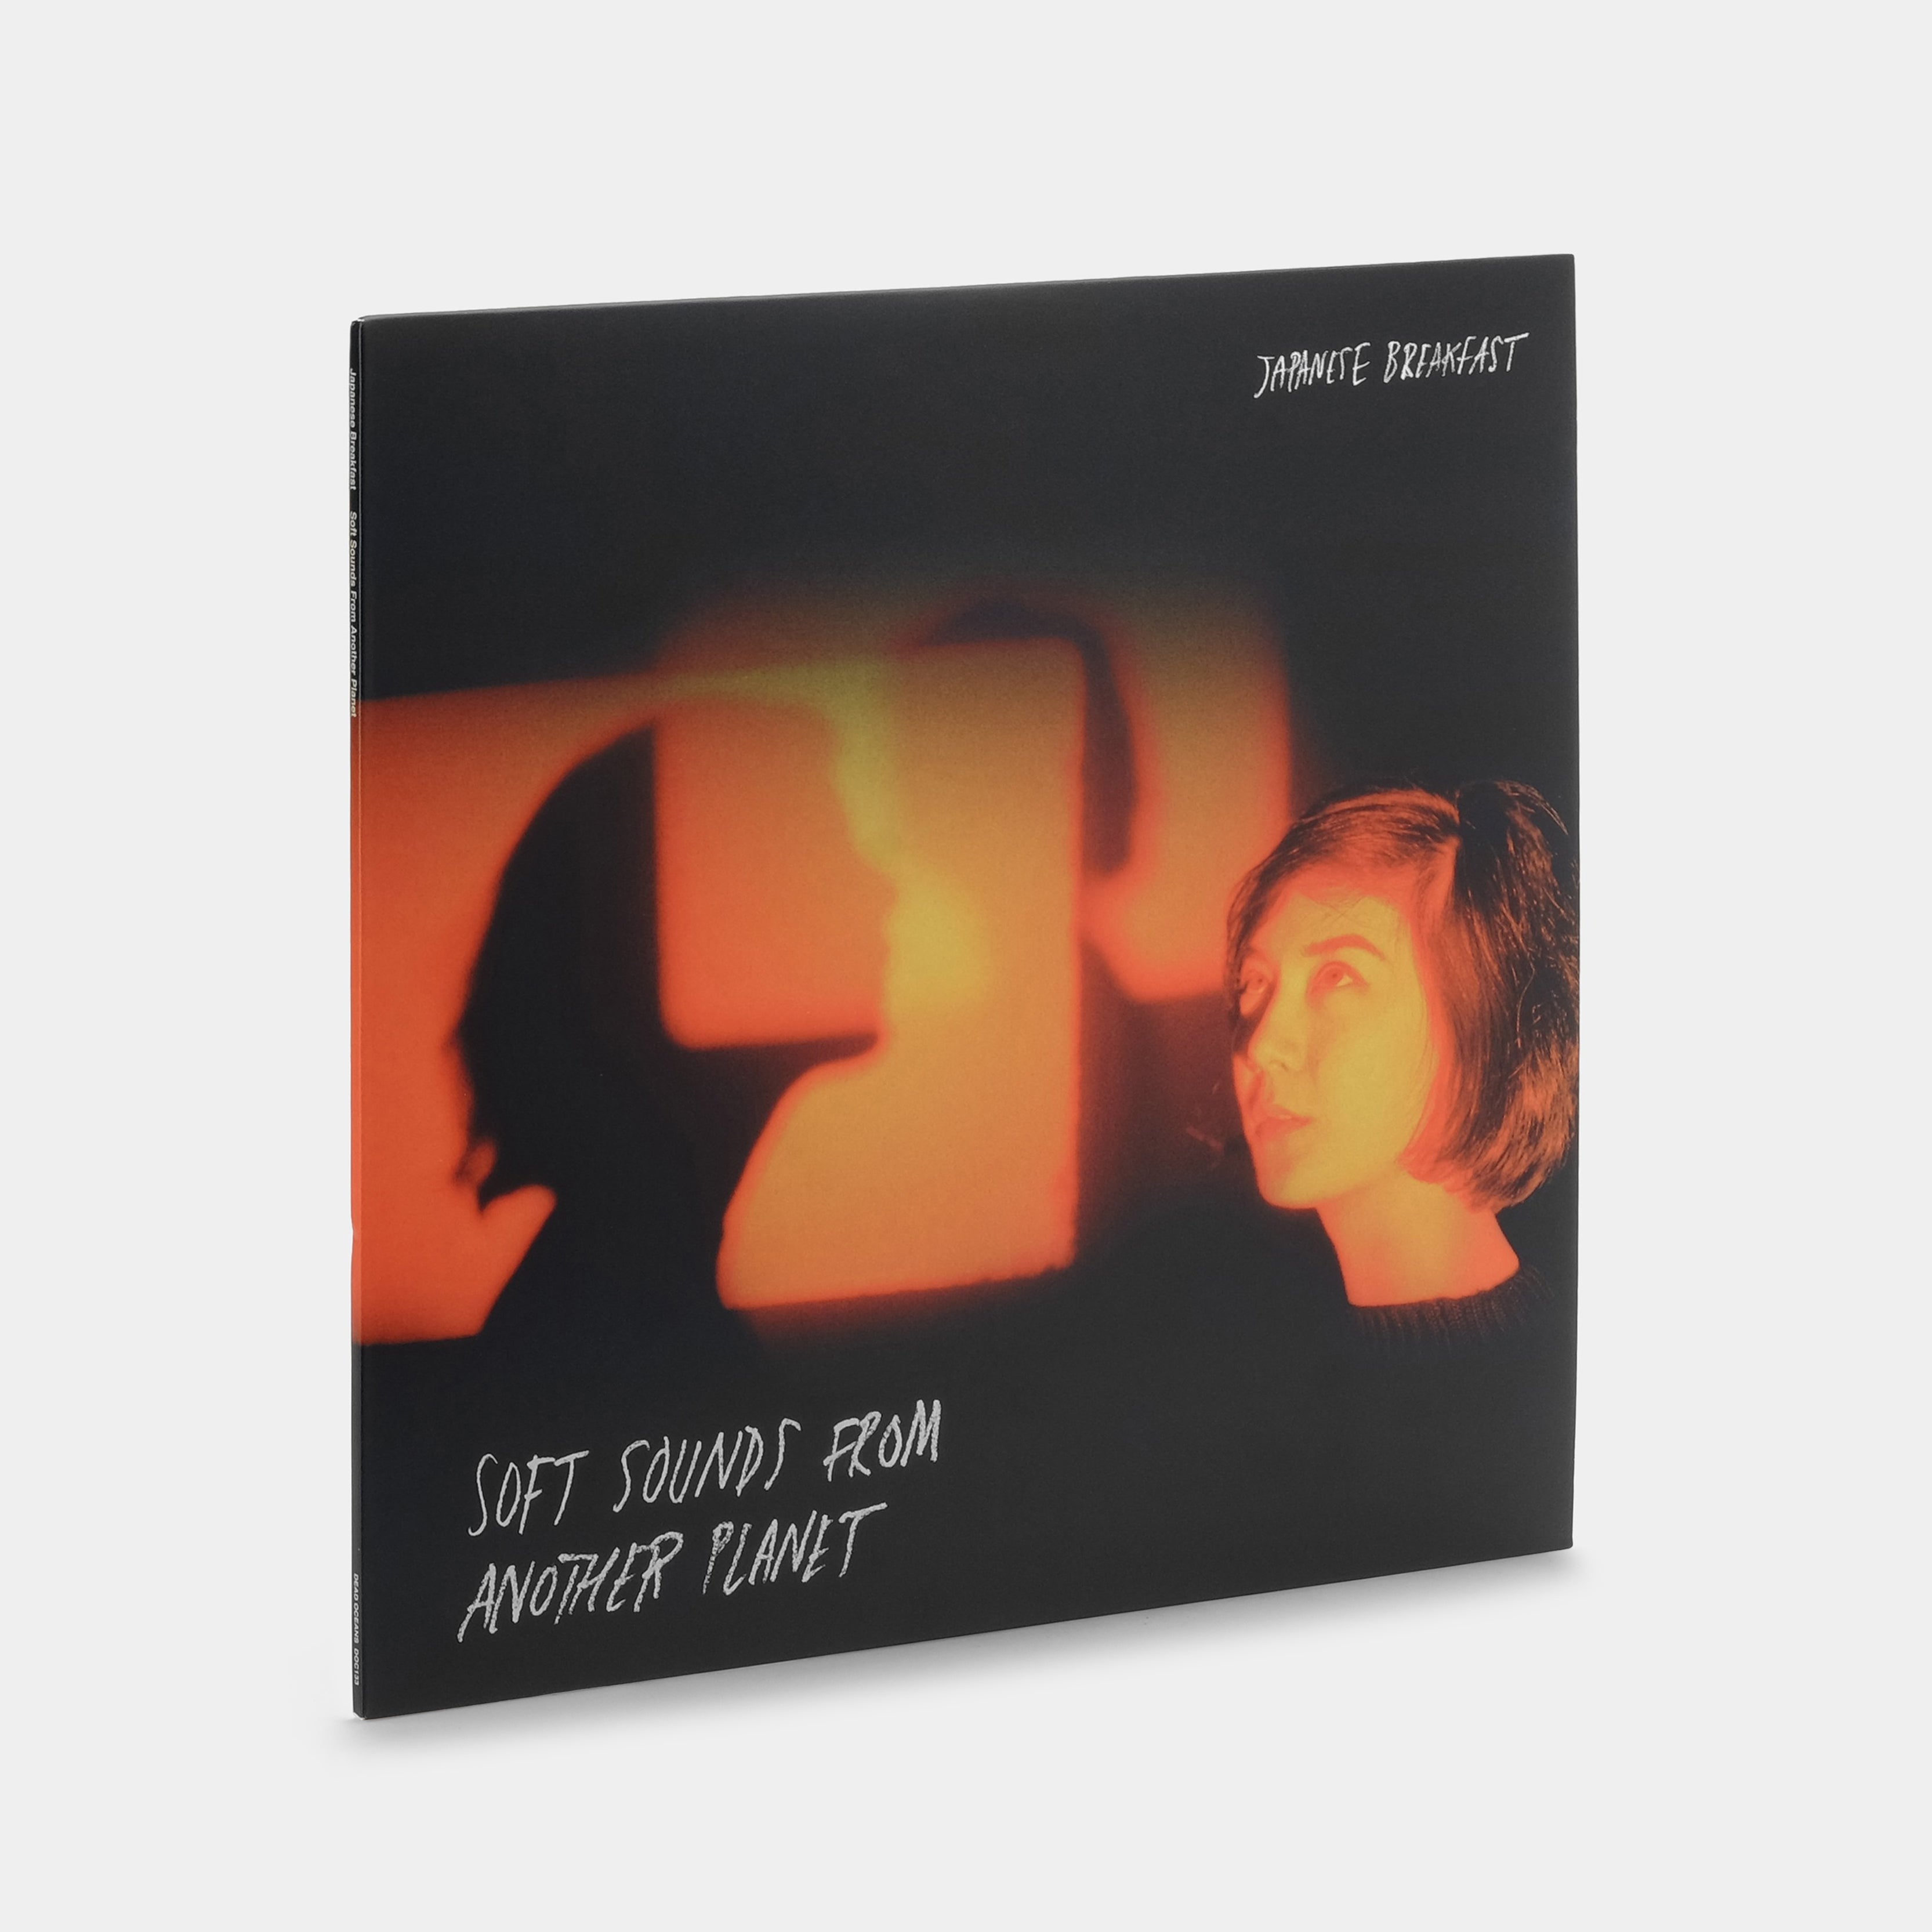 Japanese Breakfast - Soft Sounds From Another Planet LP Vinyl Record